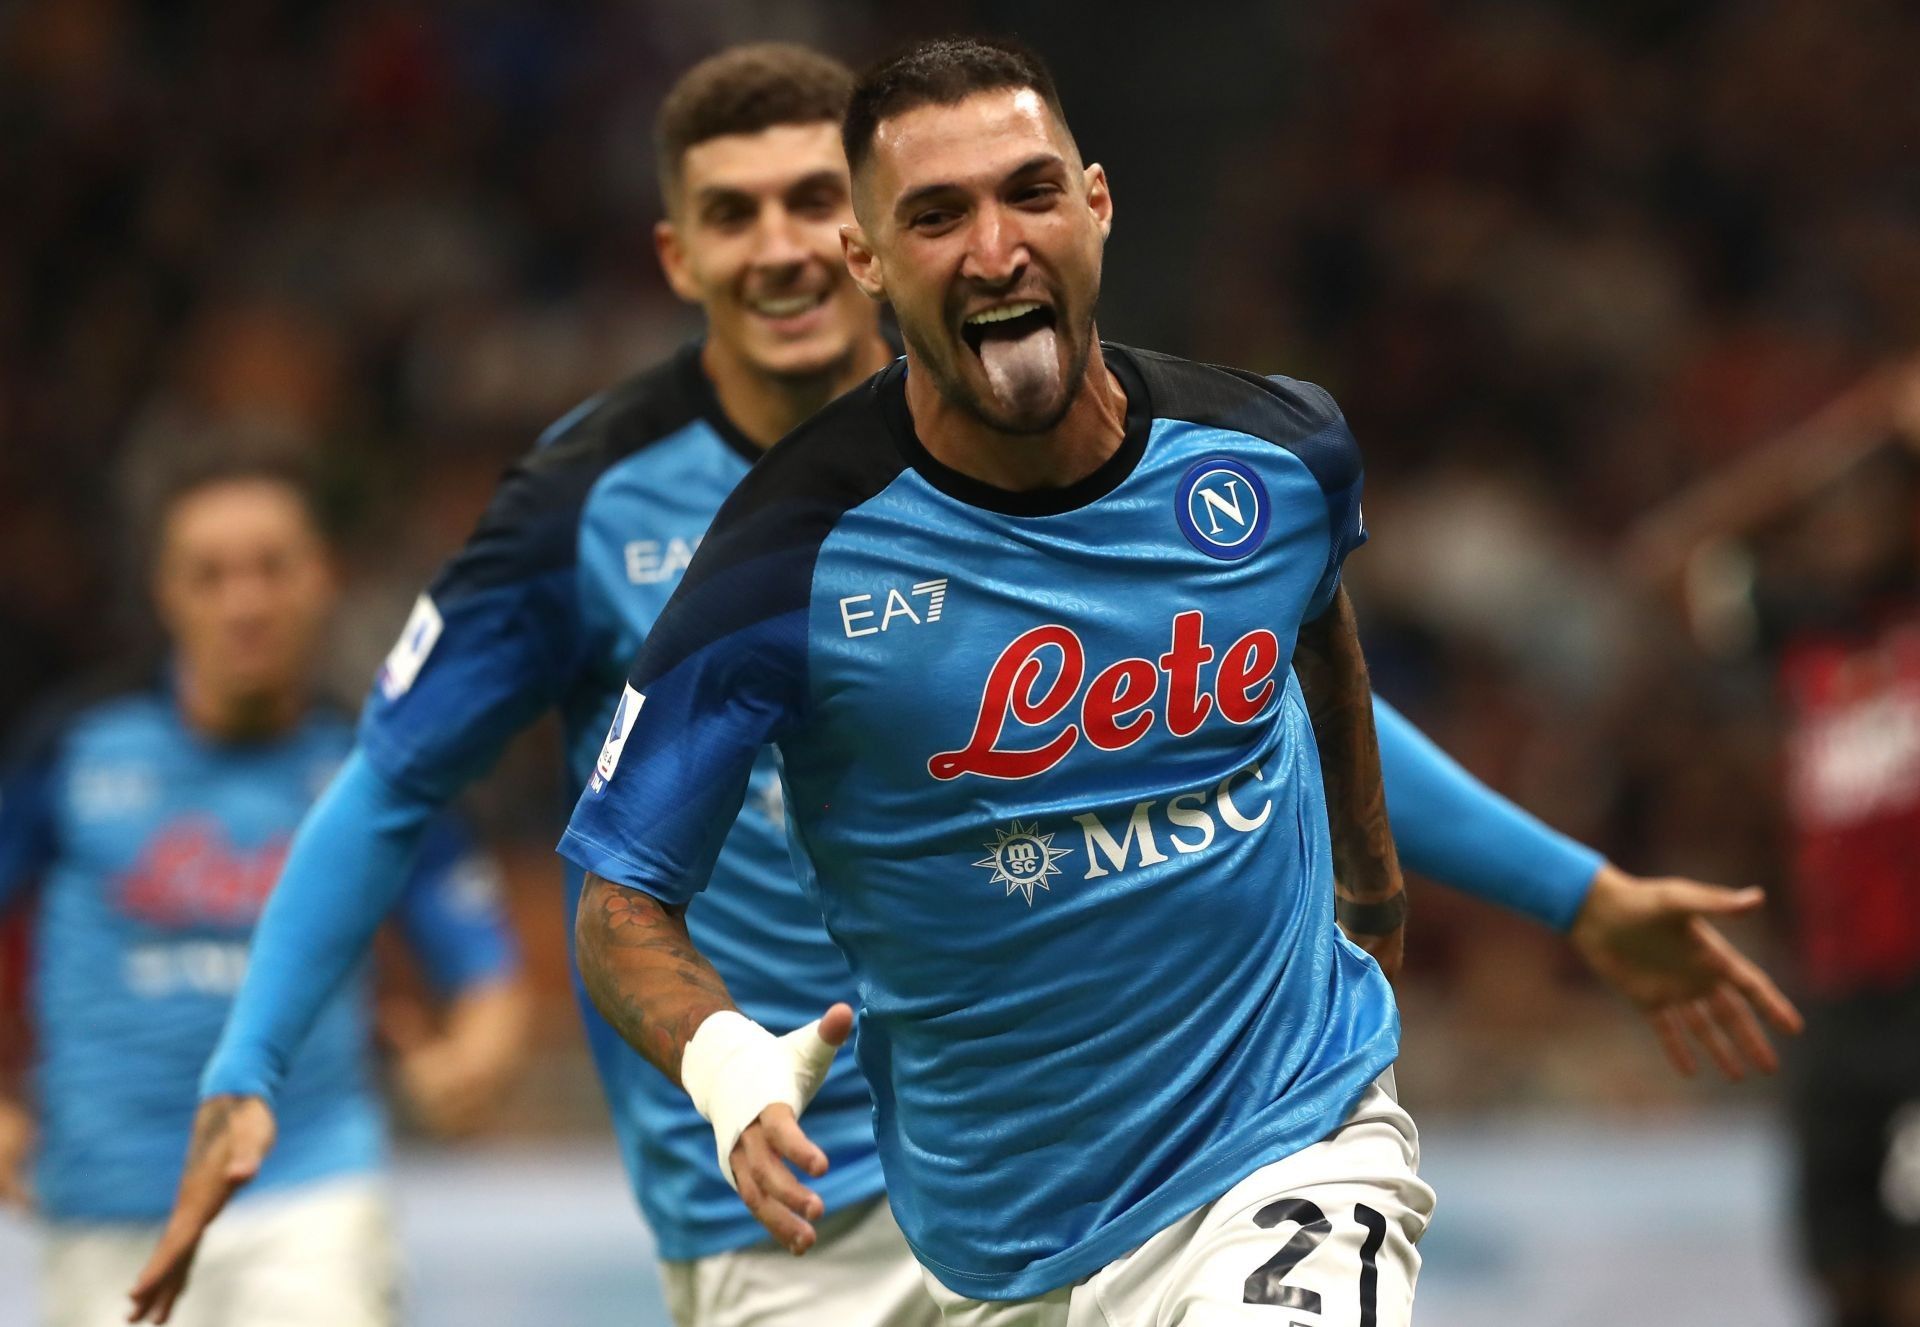 Kvaratskhelia's goal and assist help Napoli to a convincing win over Ajax in Champions League